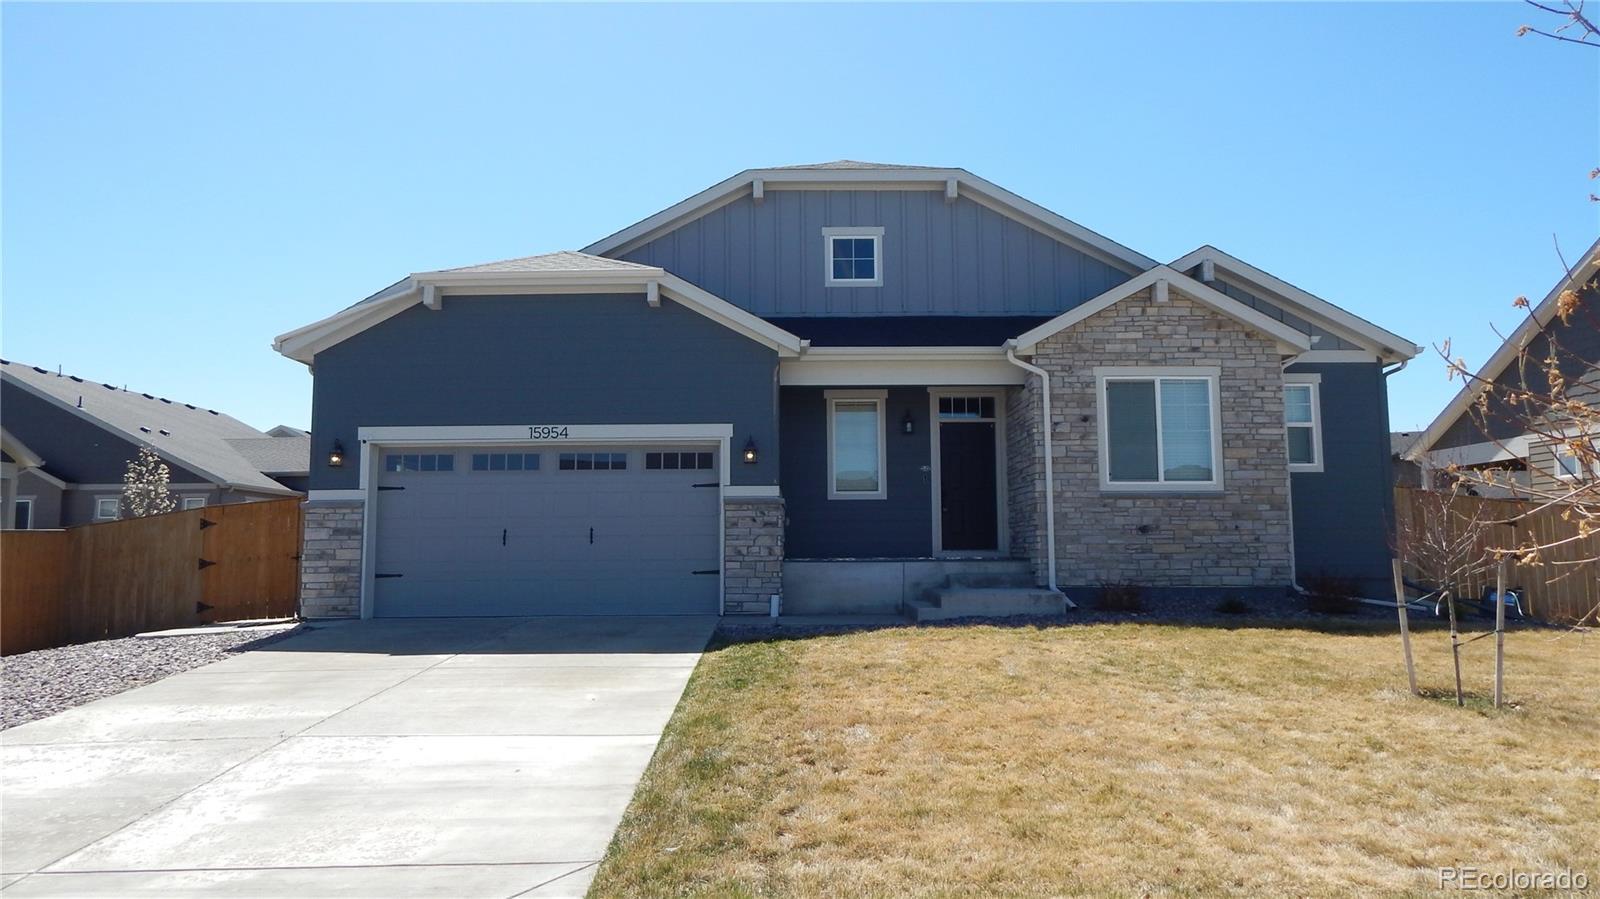 Photo one of 15954 E 115Th Ave Commerce City CO 80022 | MLS 3200012